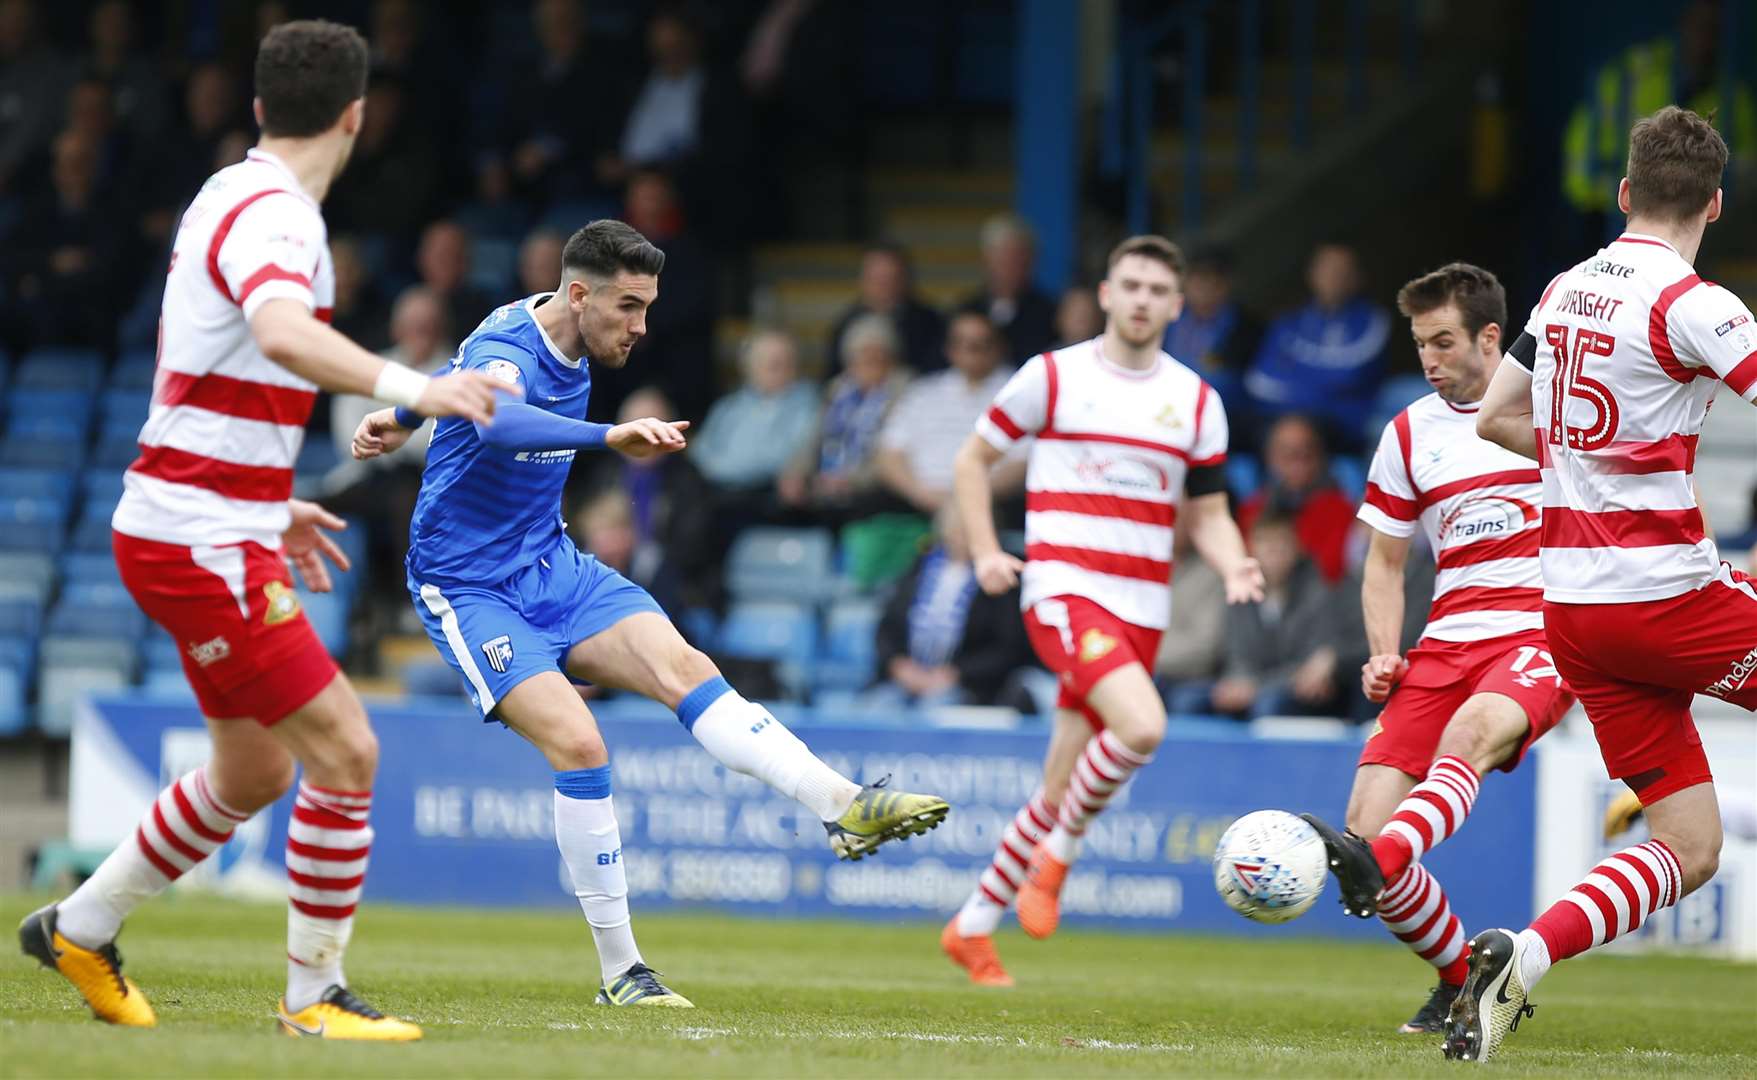 Gillingham forward Conor Wilkinson goes for goal. Picture: Andy Jones